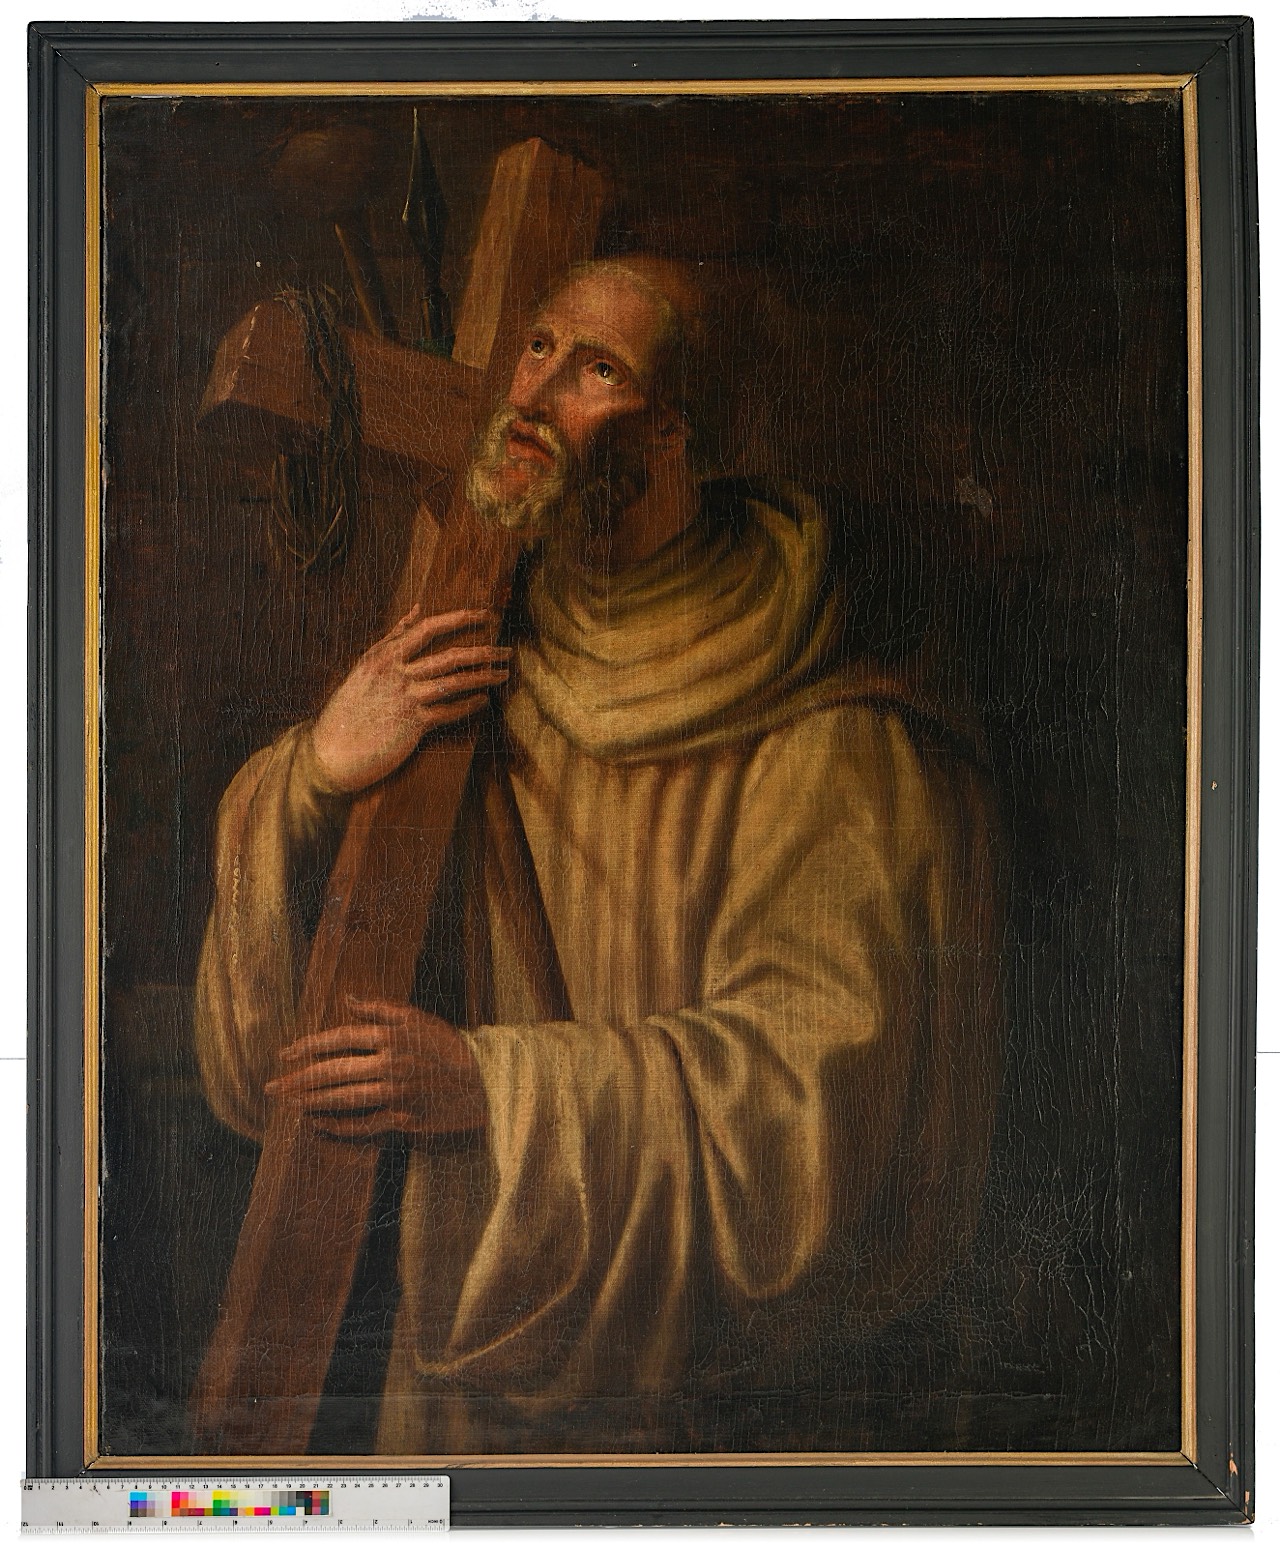 A Friar Minor depicted as a martyr, 17thC, oil on canvas, 80 x 100 cm - Image 9 of 9